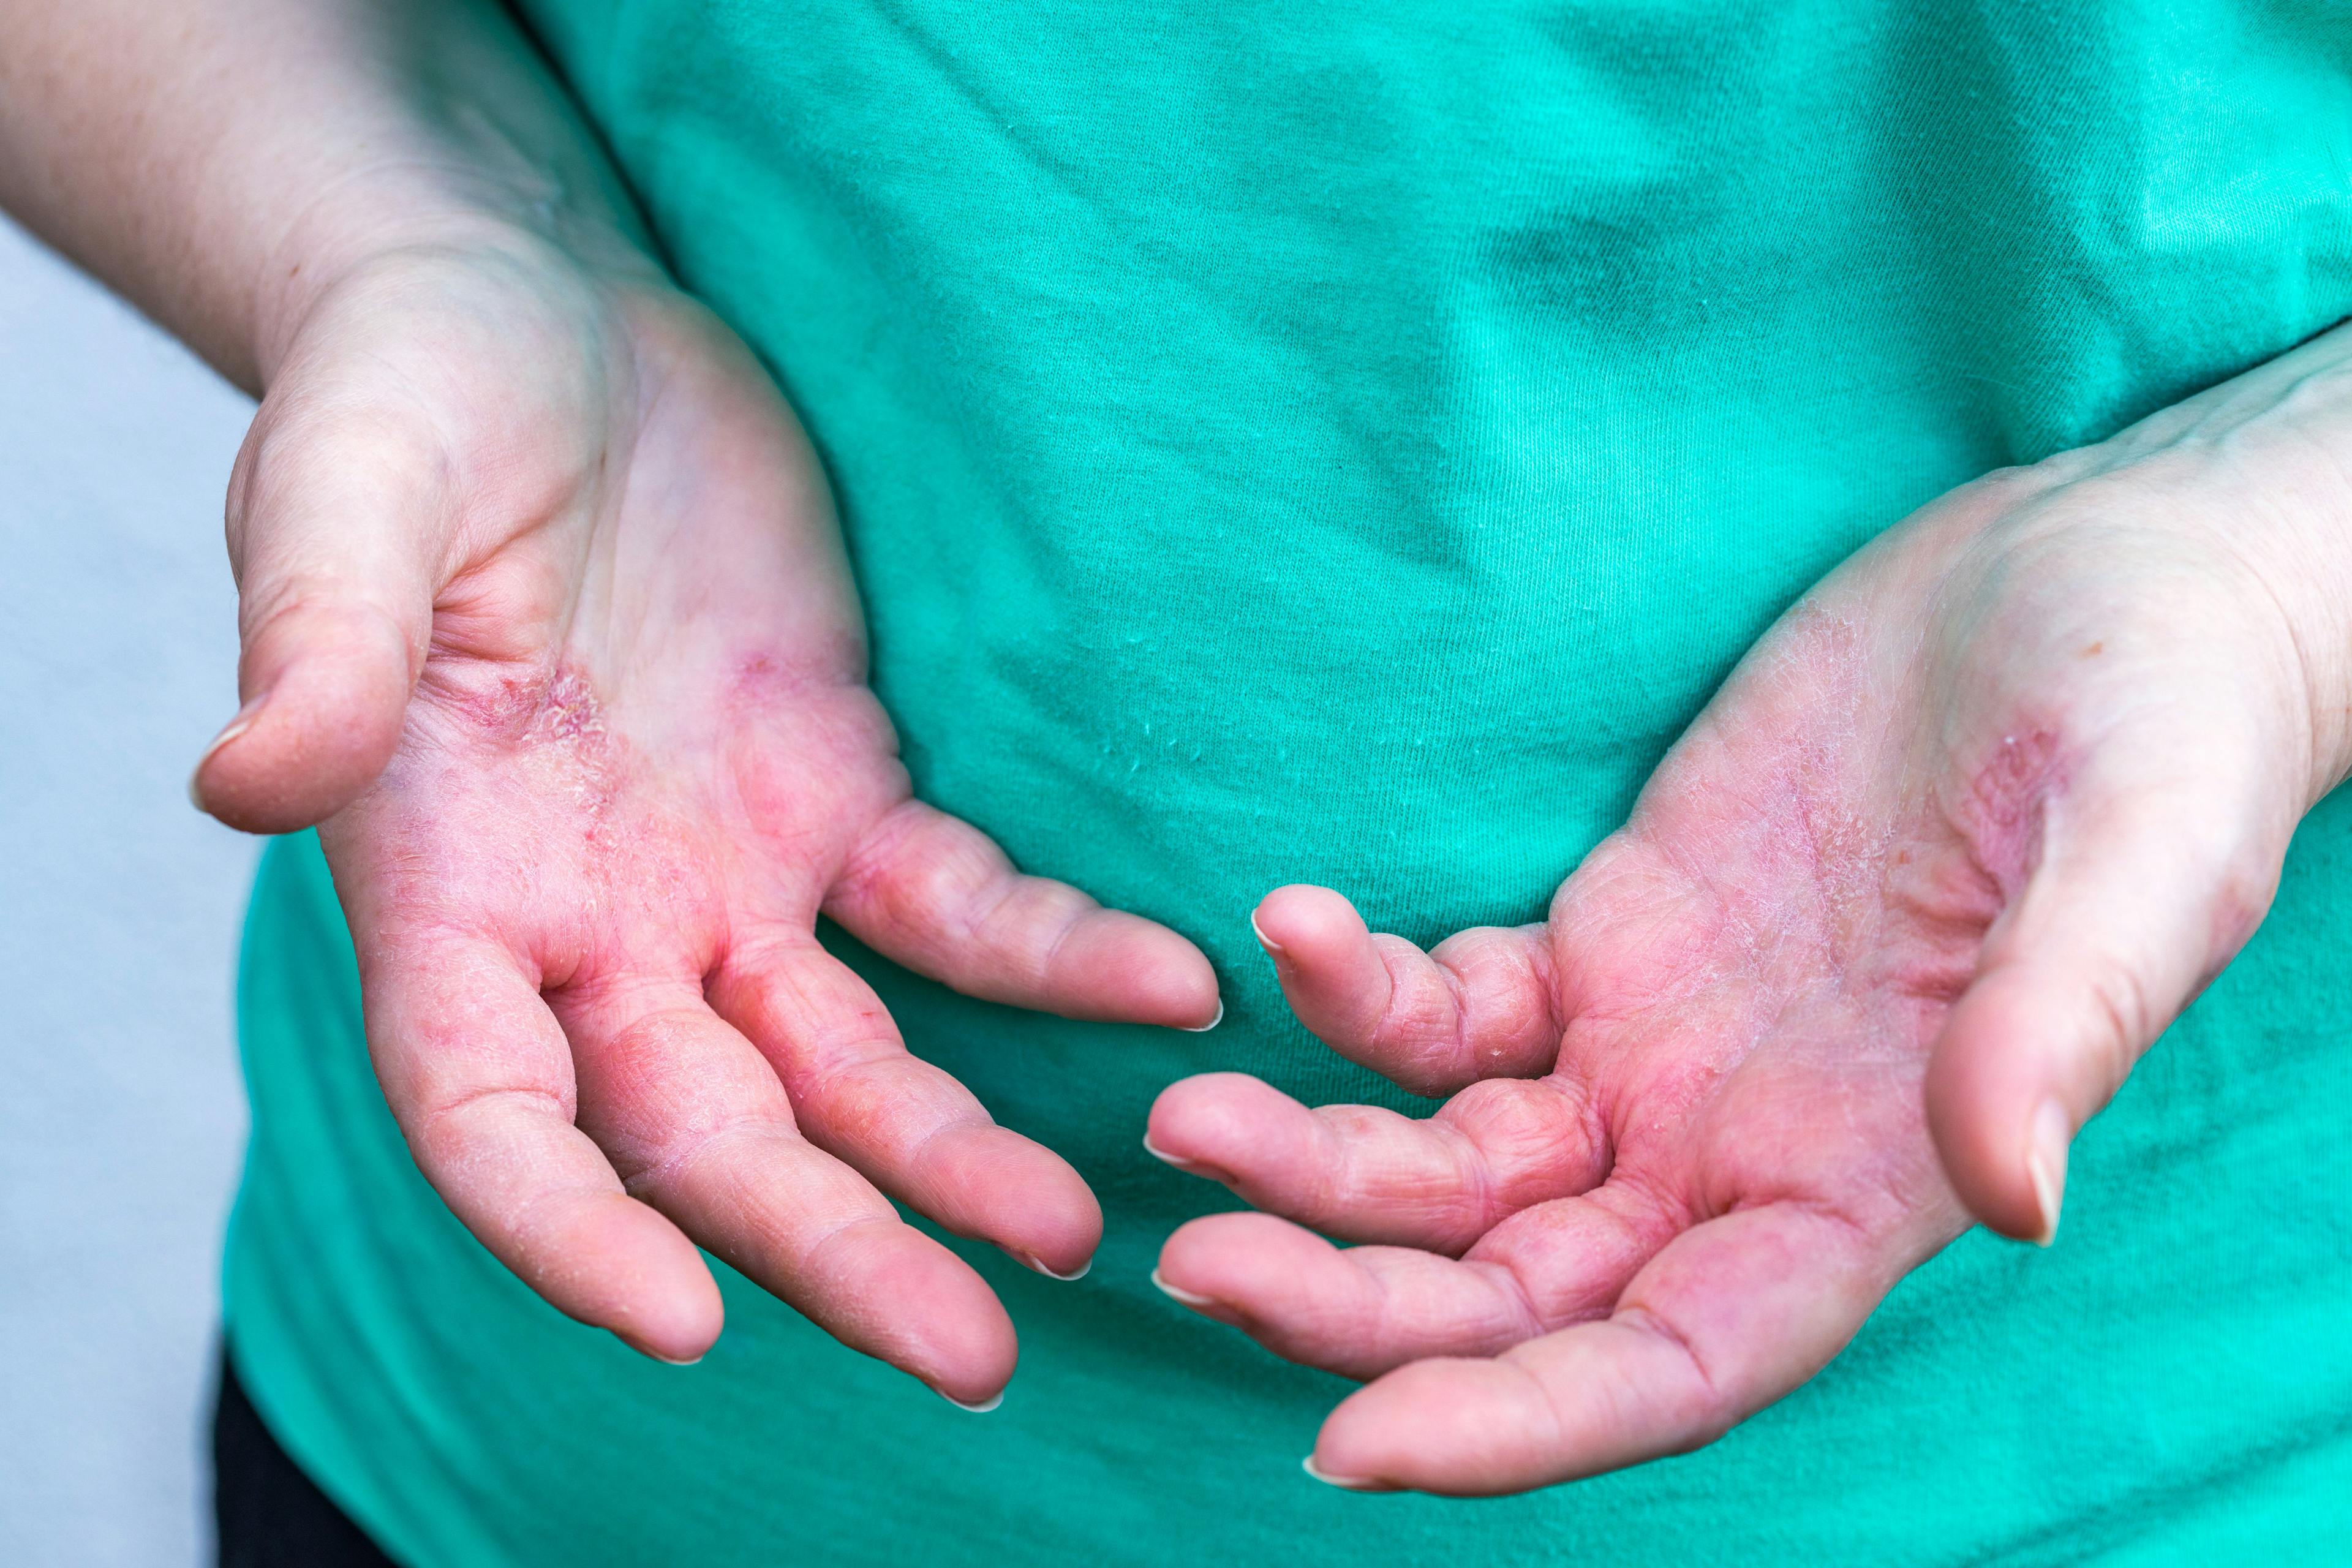 Caregivers and Patients With Atopic Dermatitis Prioritize Symptom Control, Adverse Effect Management